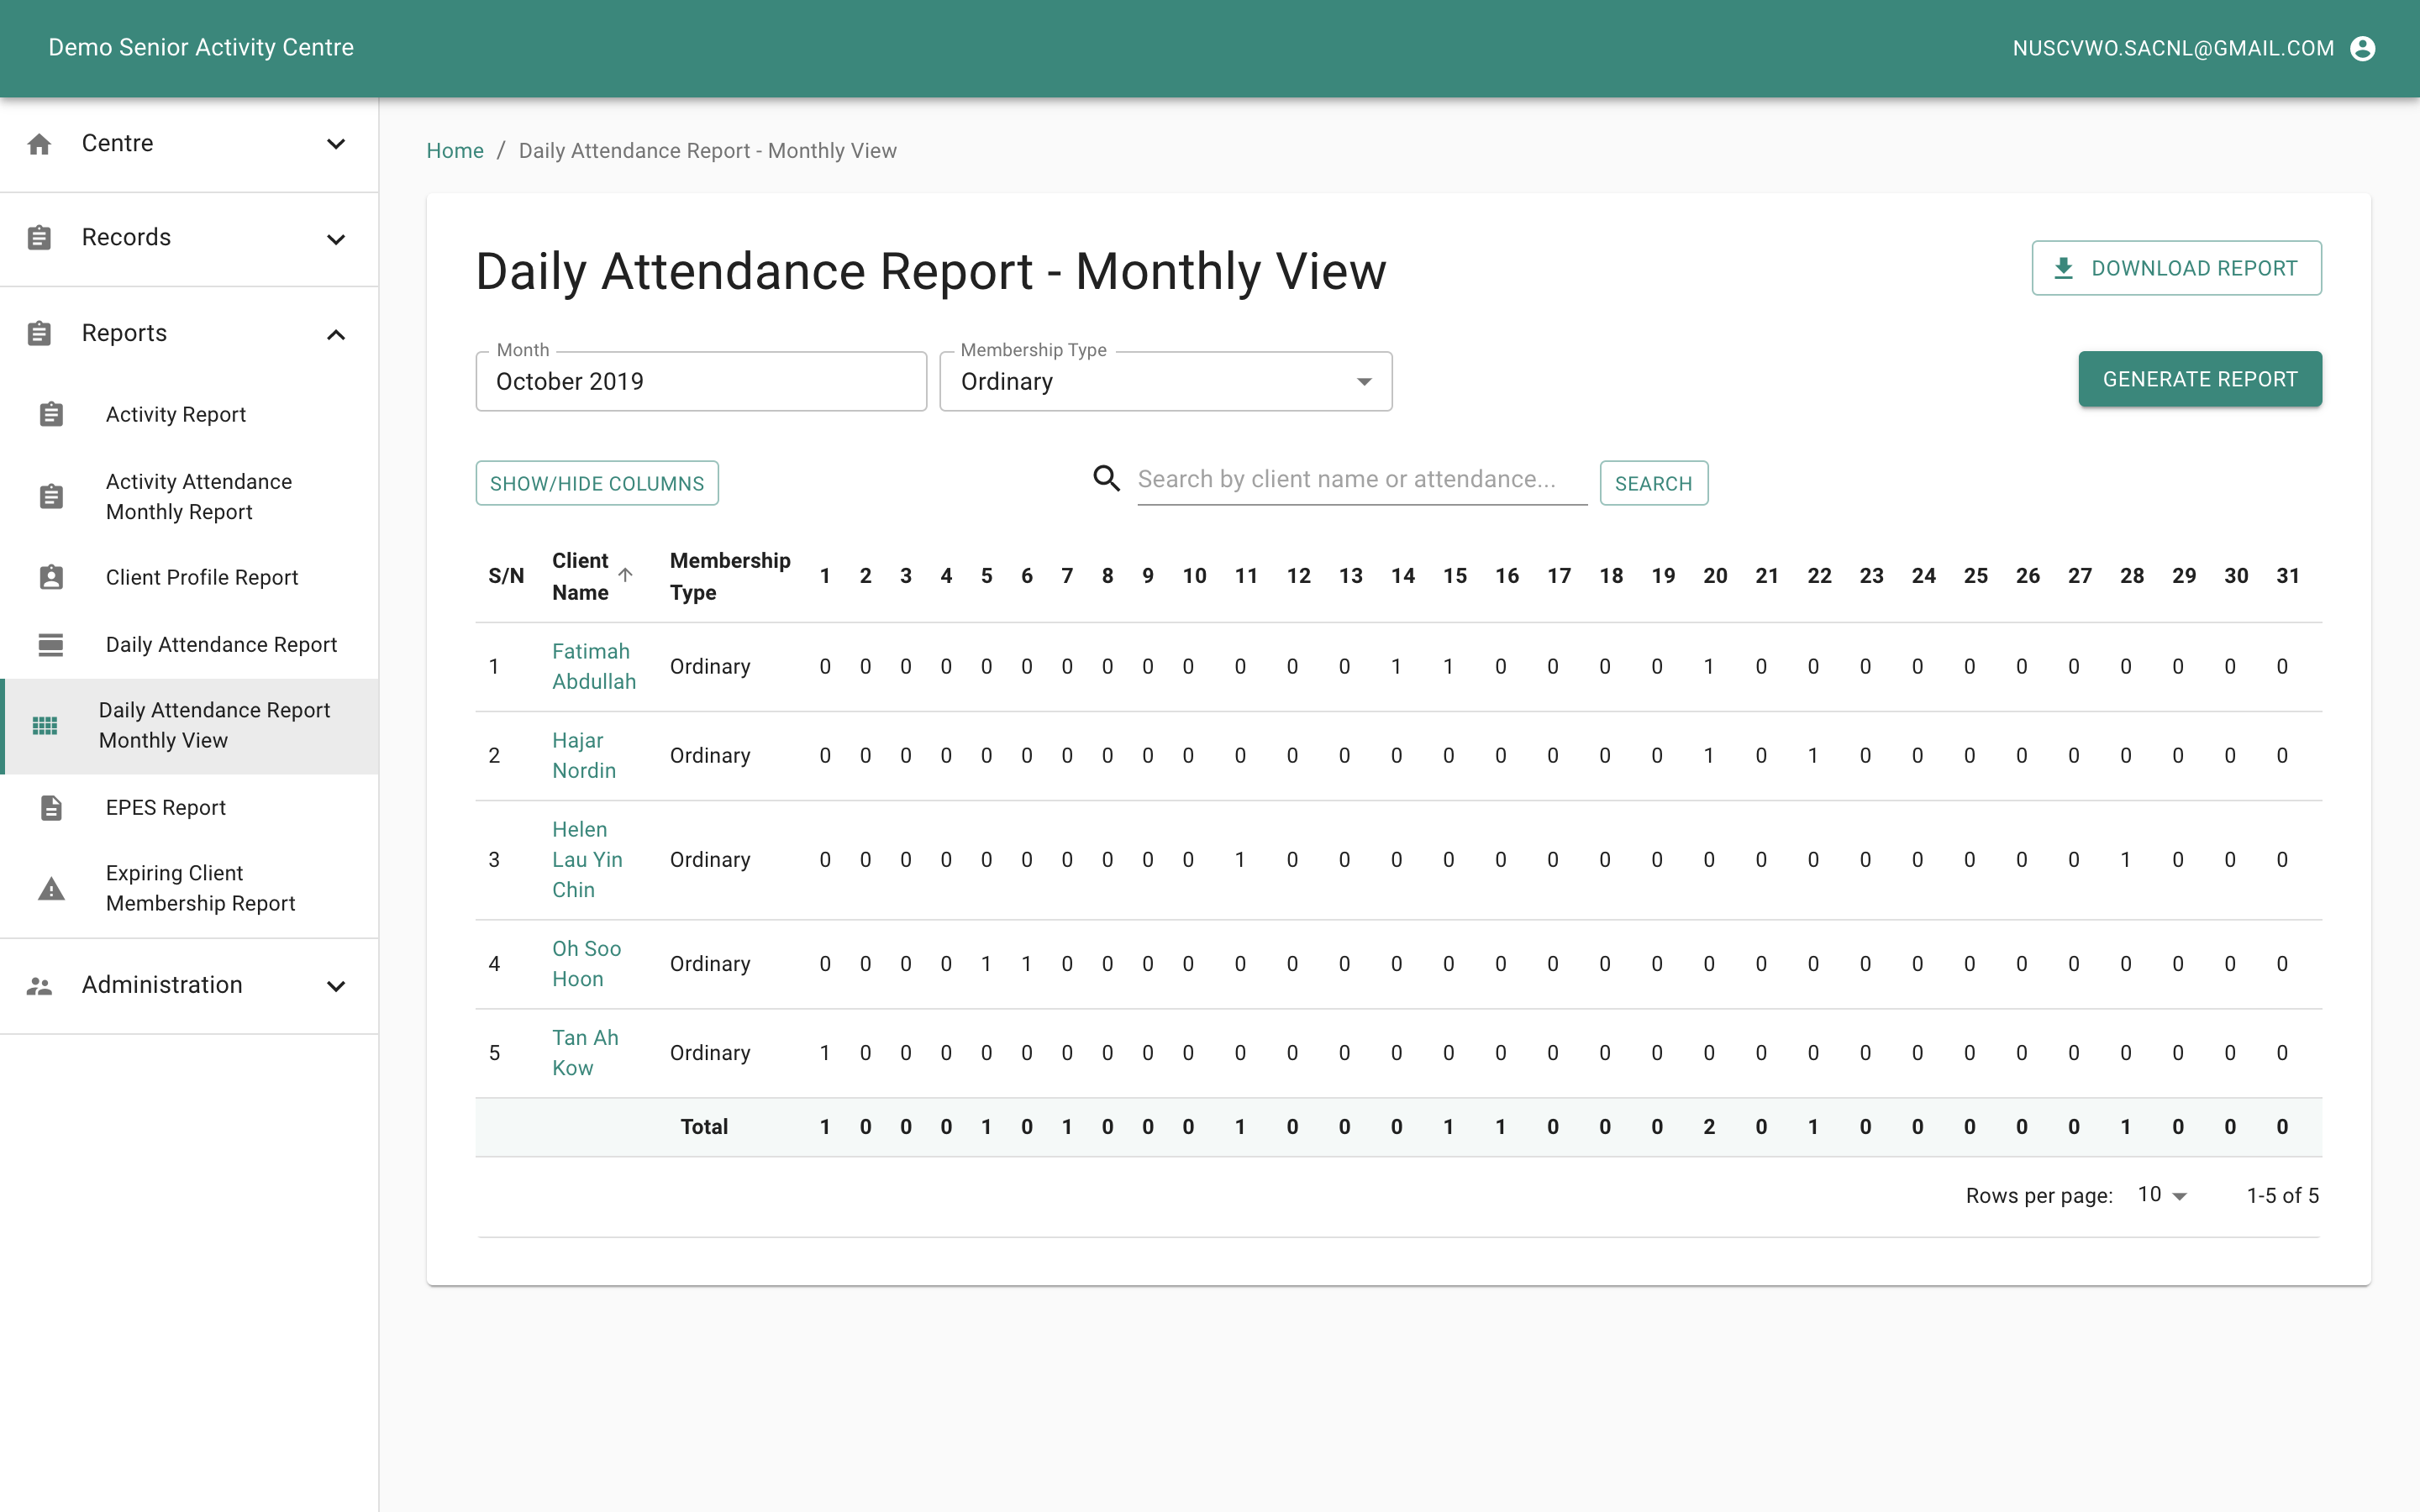 Daily Attendance Report - Monthly View